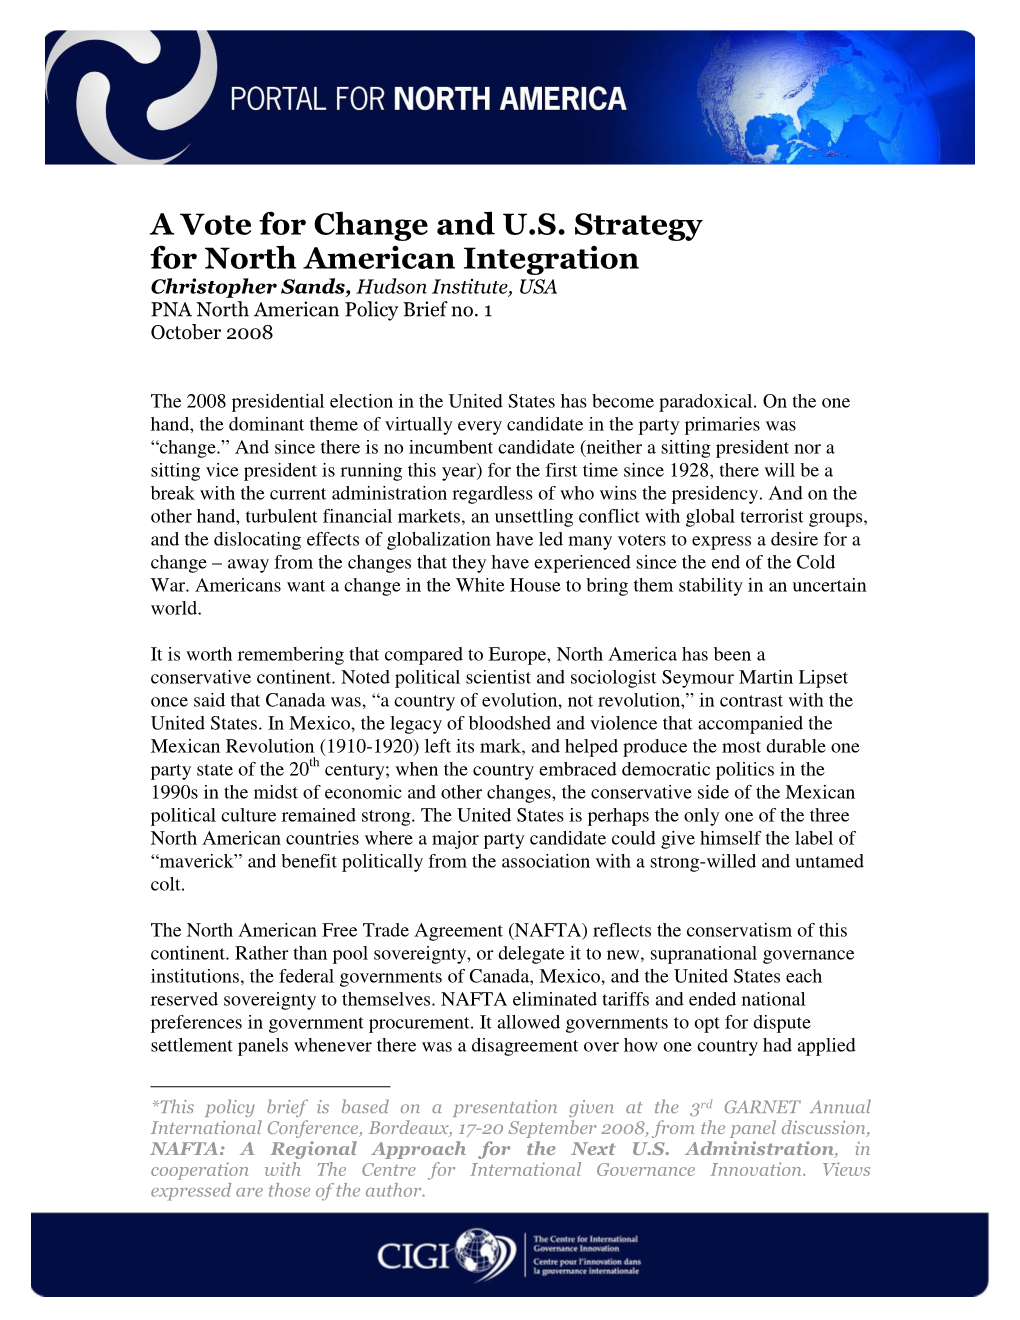 A Vote for Change and US Strategy for North